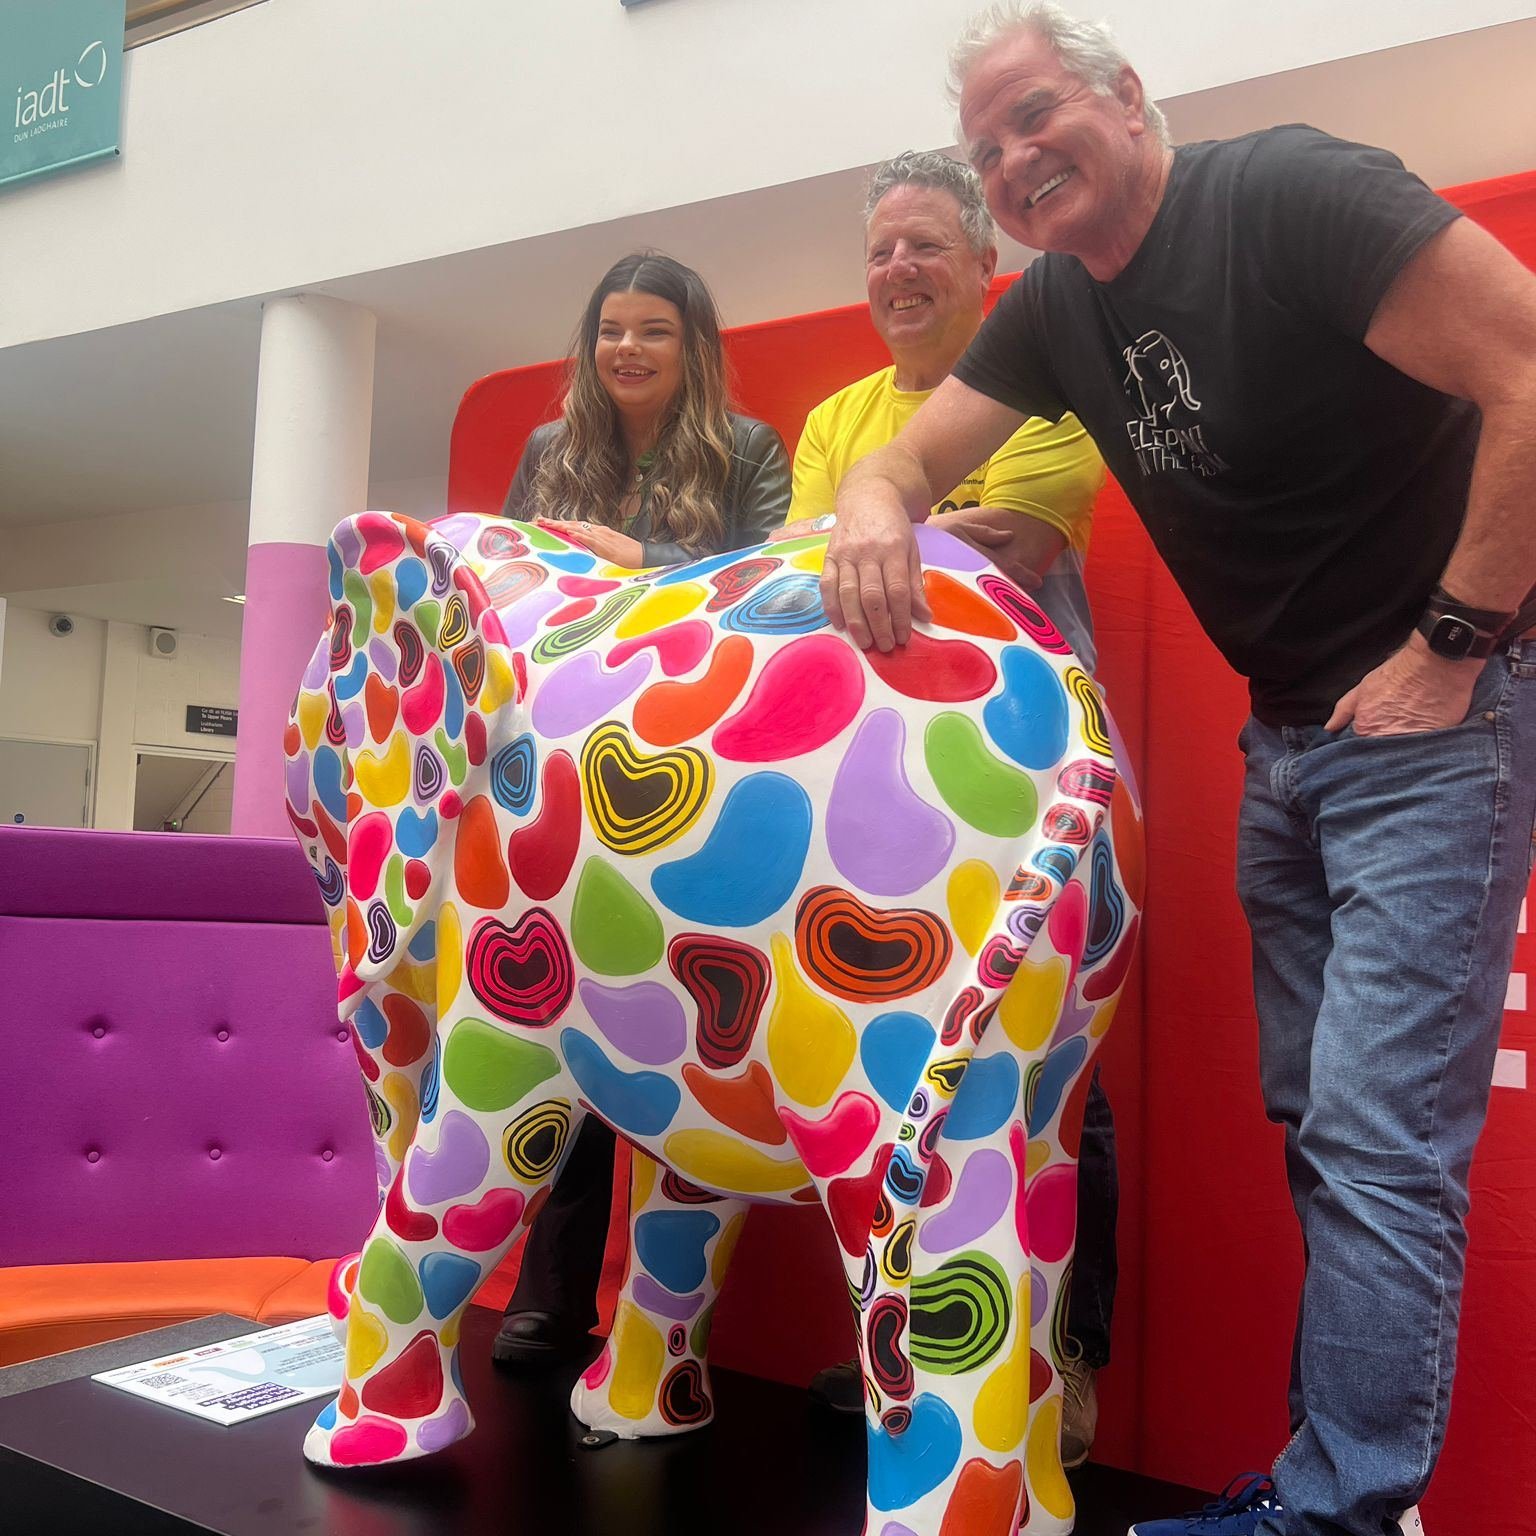 We are thrilled to unveil the latest addition to the Elephant In The Room herd, an exquisitely vibrant elephant painted by the talented Caoimhe Farrell and proudly sponsored by IADT. This striking sculpture was launched at IADT recently, symbolising 